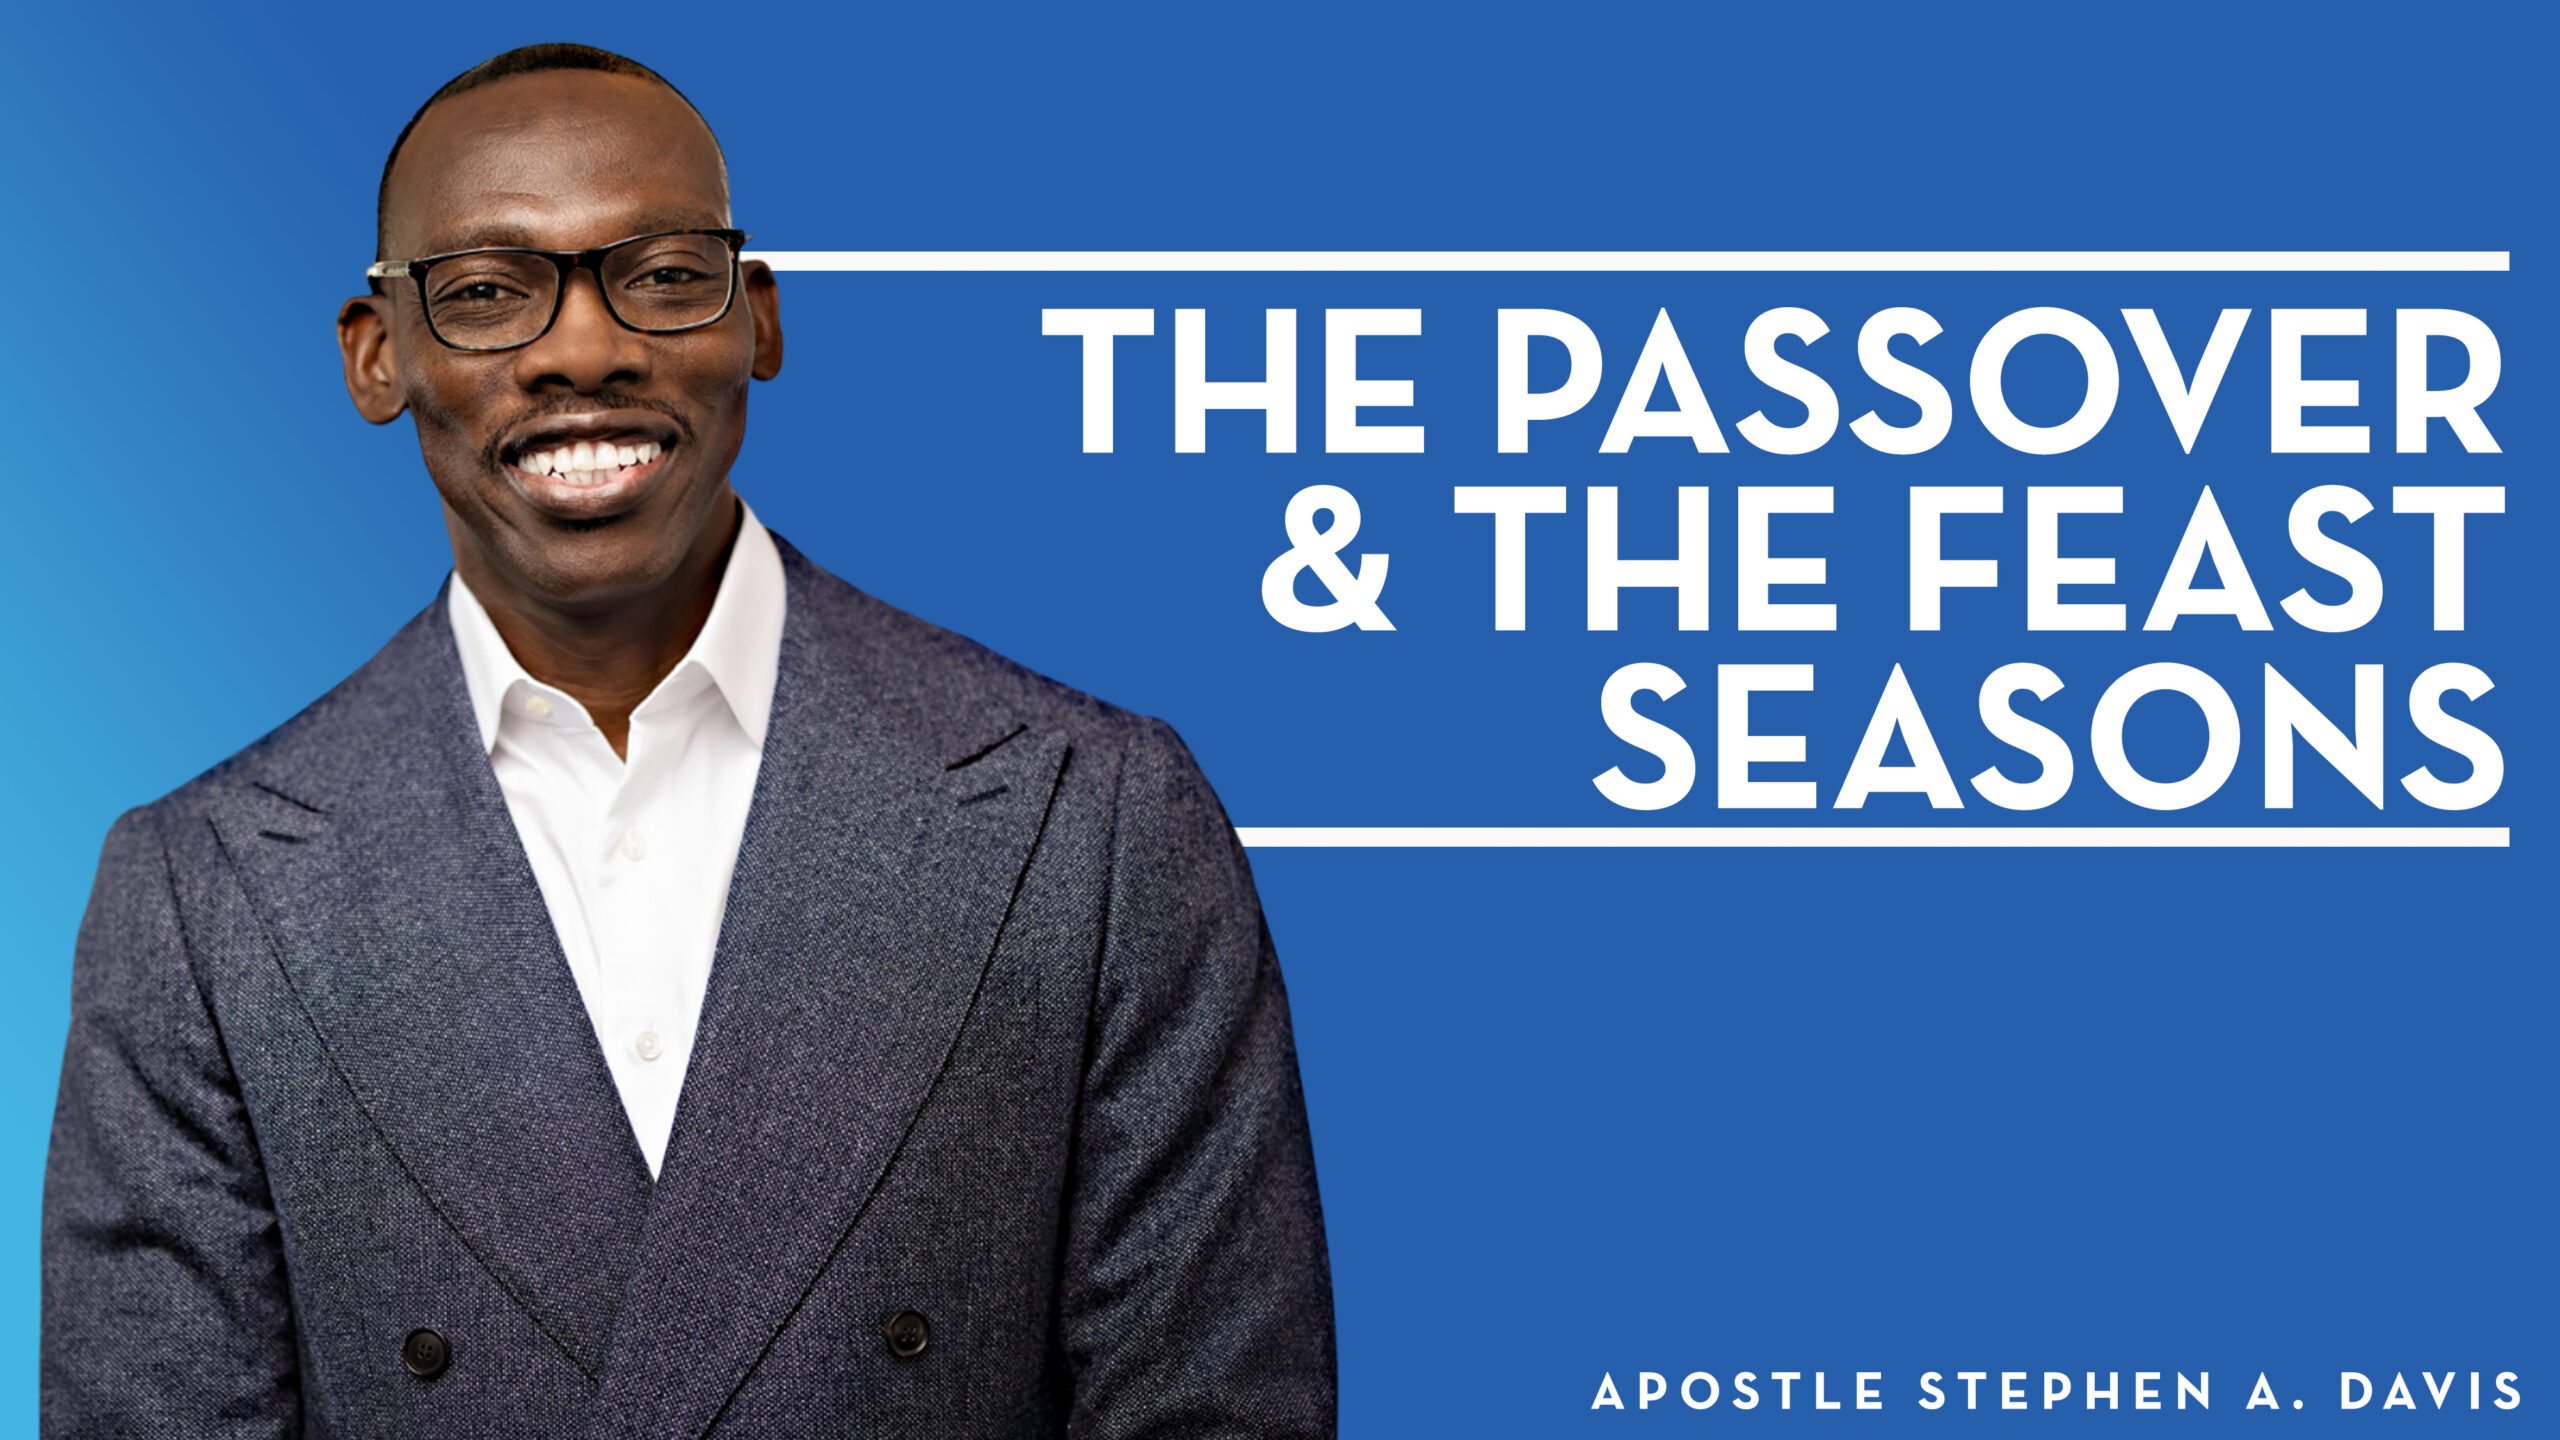 The Passover & The Feast Seasons – Bishop Stephen A. Davis